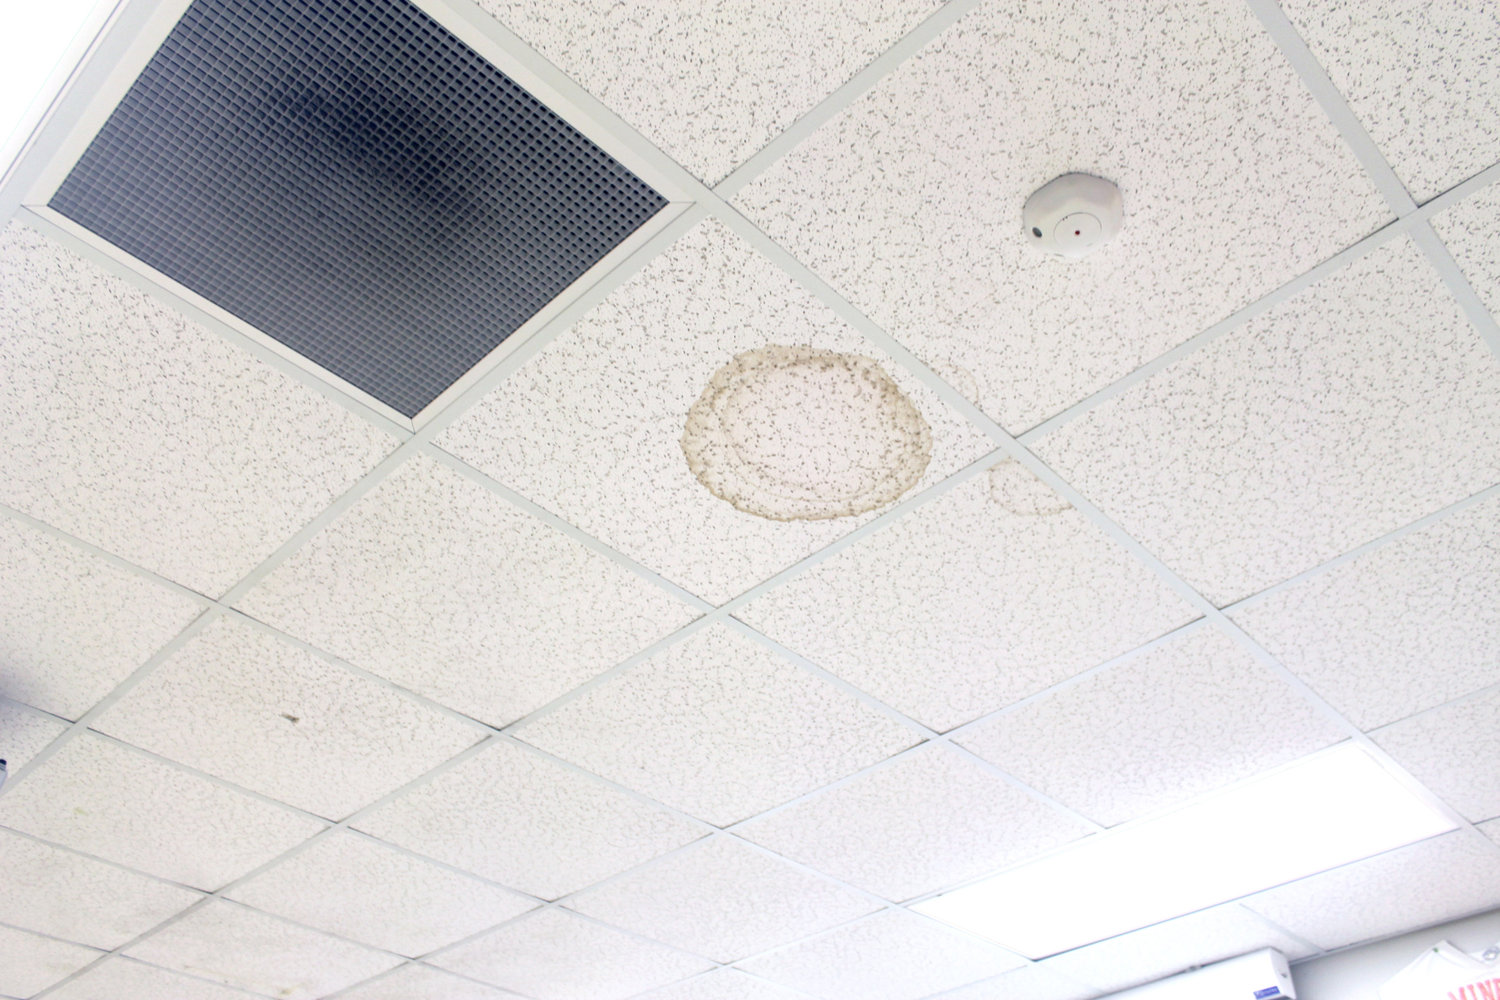 This water spot was one of several that was visible in one of the high school outbuildings. In fact, this is the ceiling of the classroom for the school’s newest science laboratory.